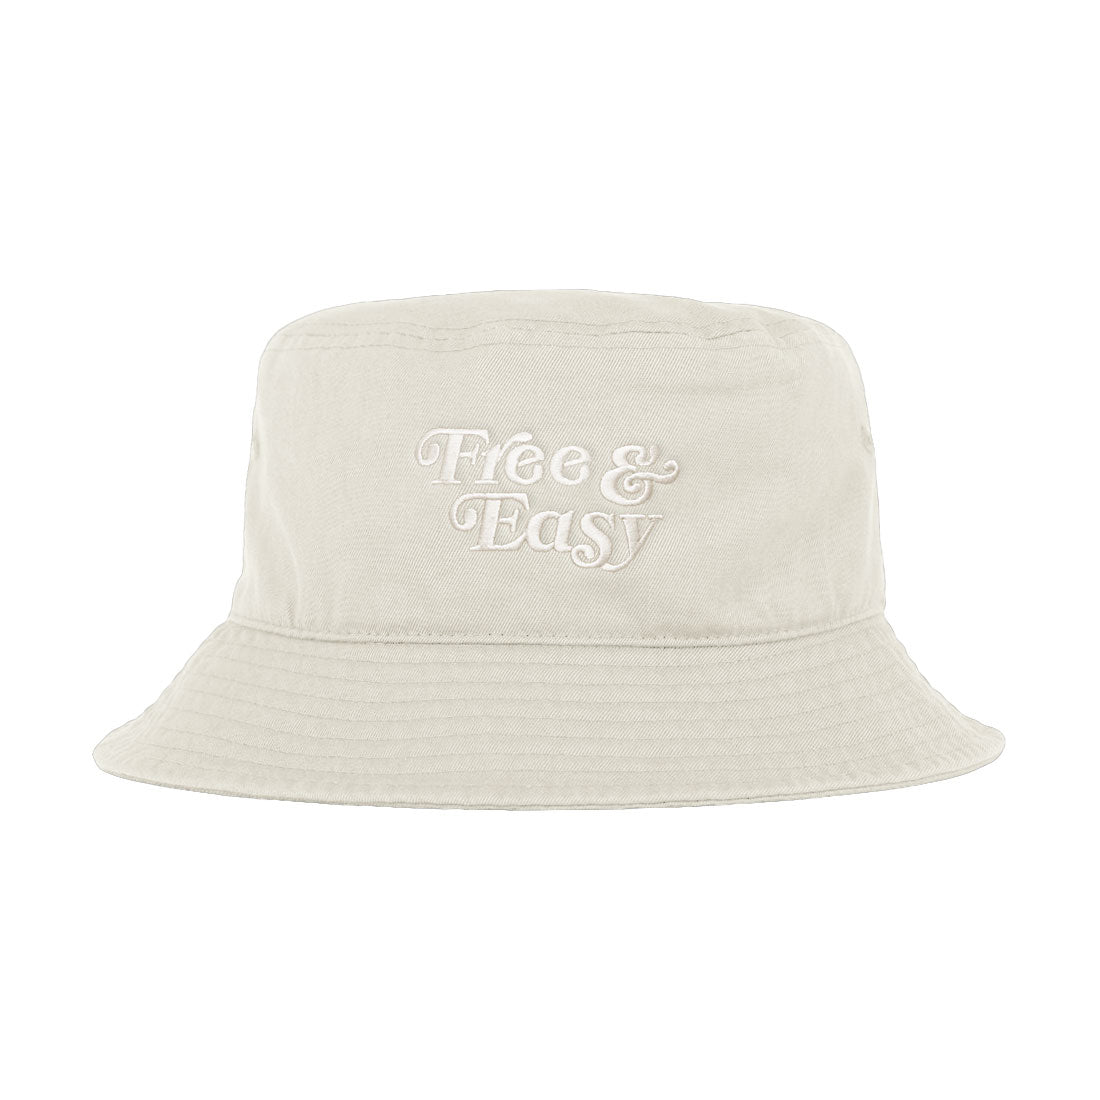 Free & Easy Don't Trip Bucket Hat in off-white with white Free & Easy embroidery on a white background -Free & Easy